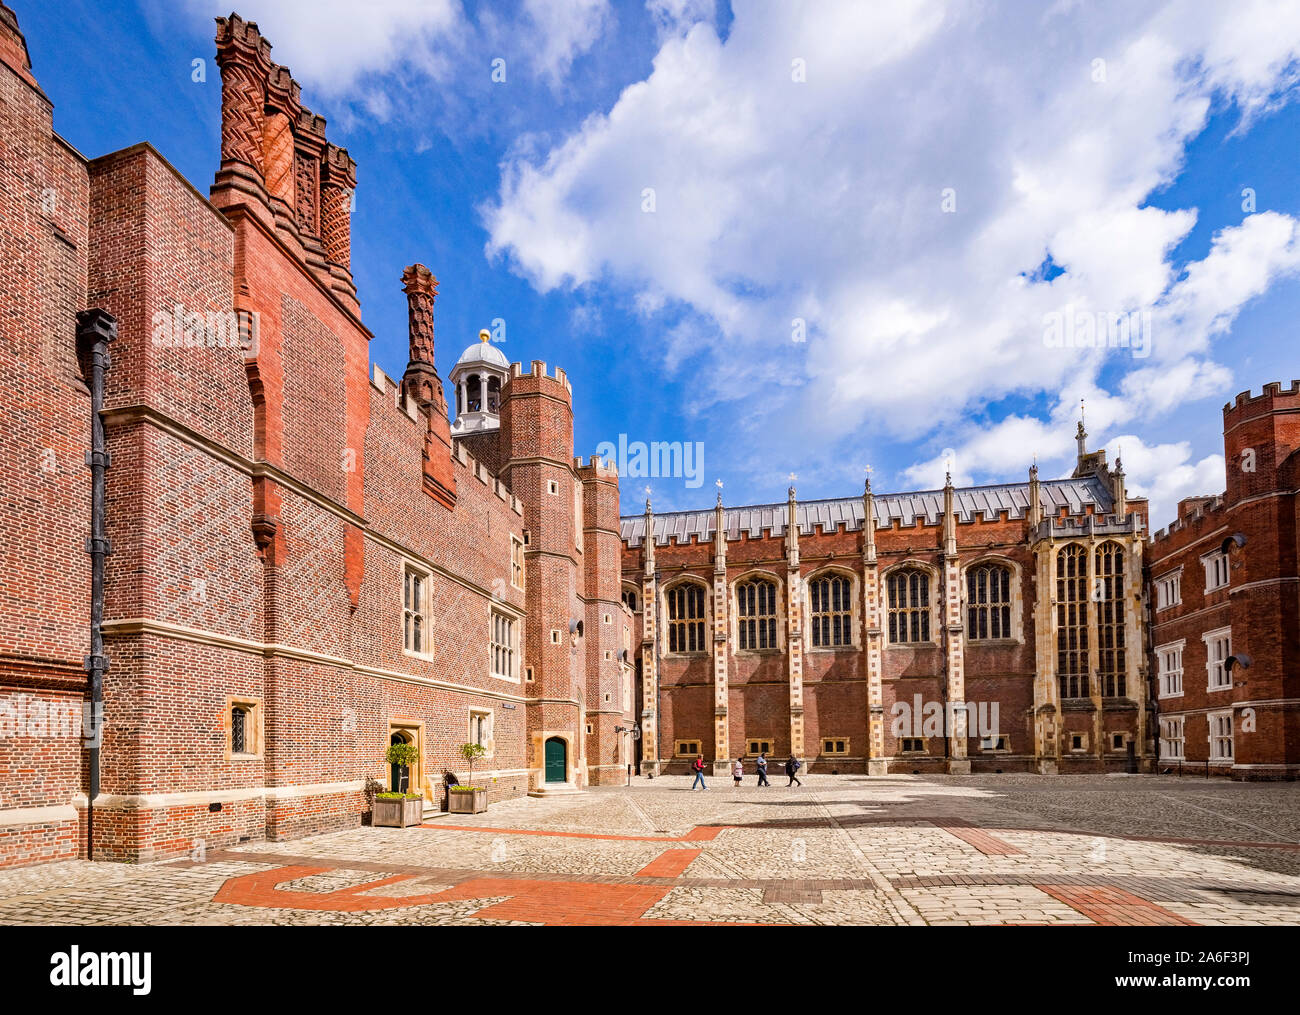 9 June 2019: Richmond upon Thames, London, UK - The Clock Court in Hampton Court Palace, the former royal residence in West London. Stock Photo